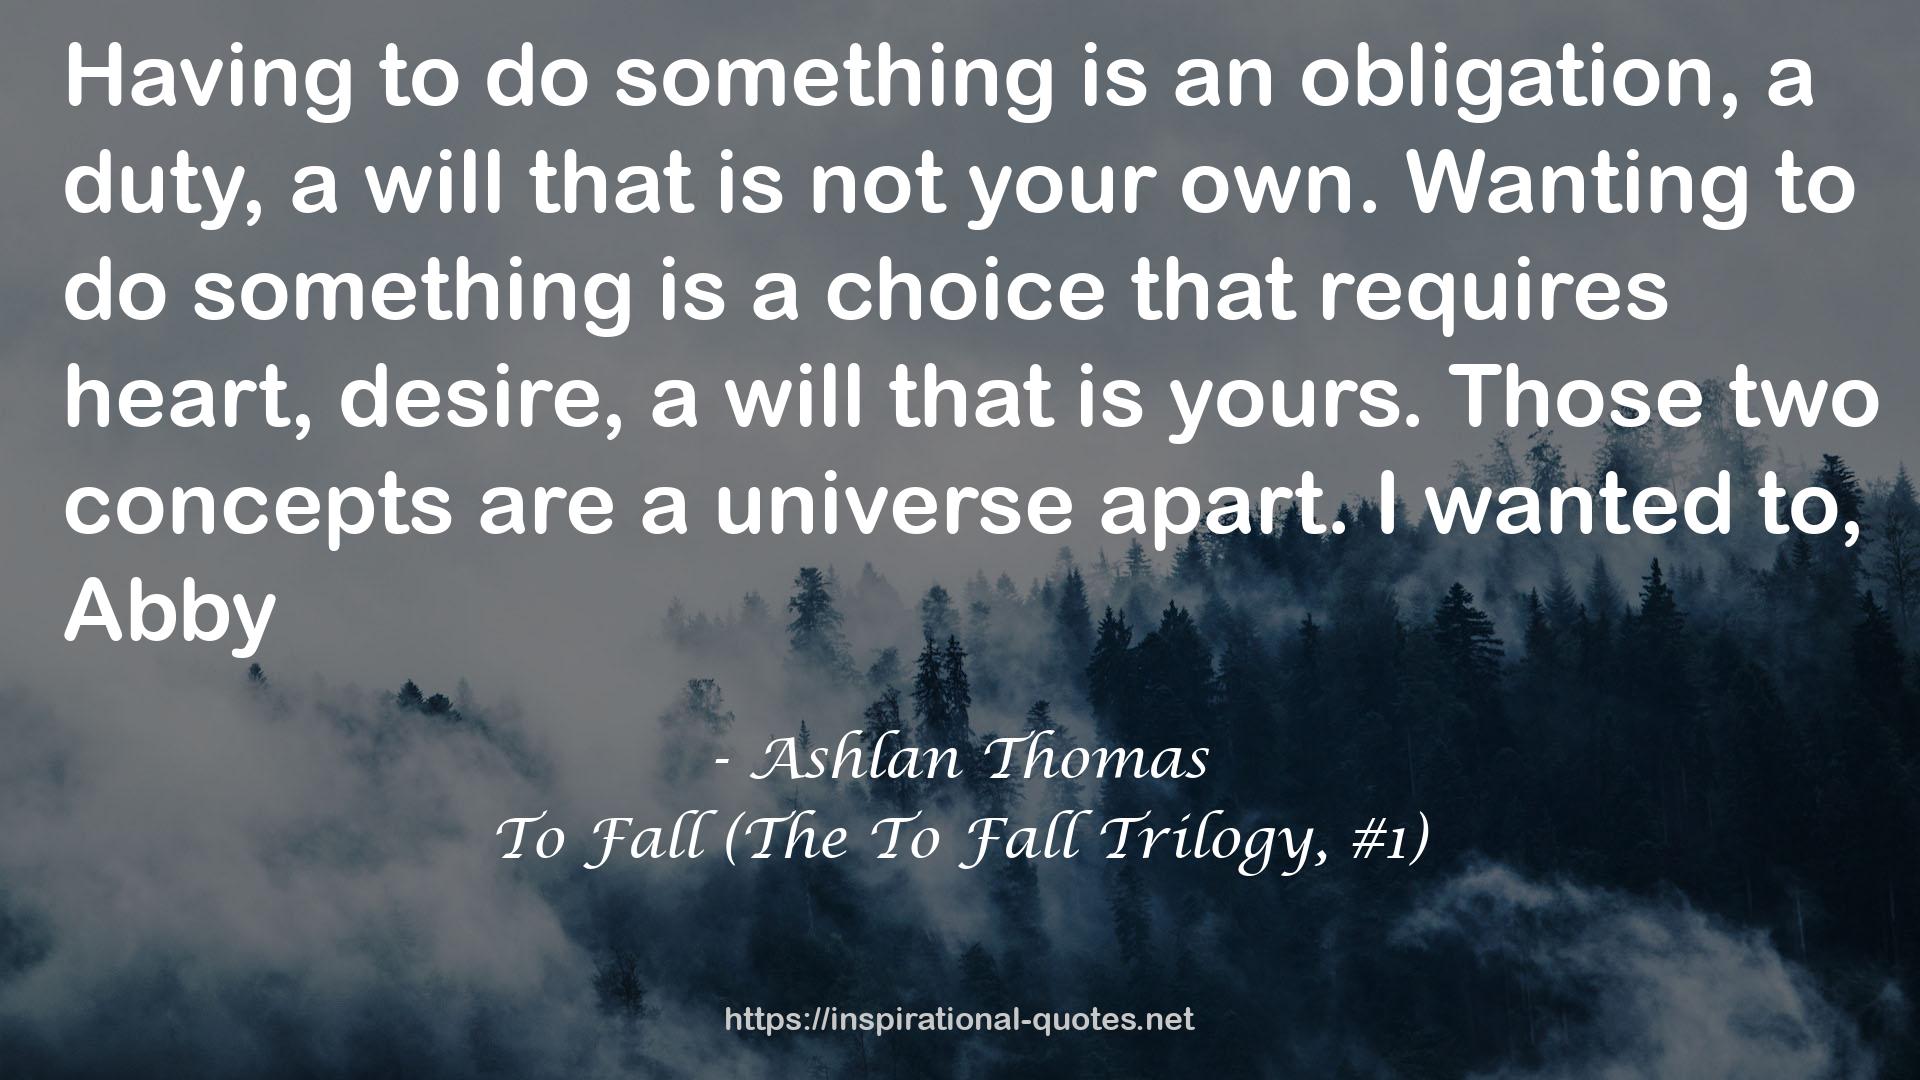 To Fall (The To Fall Trilogy, #1) QUOTES